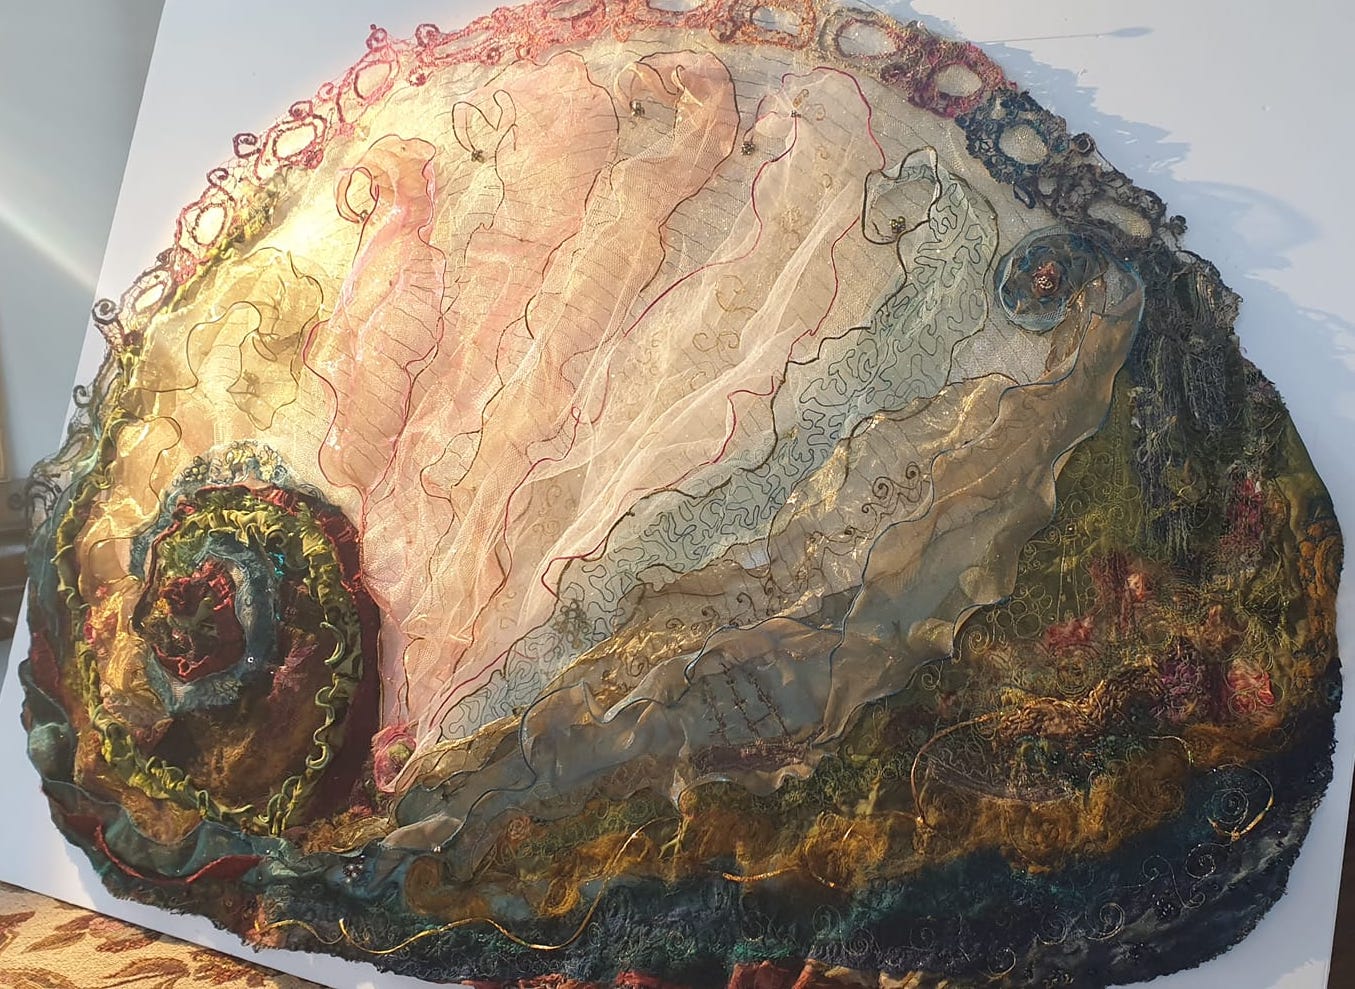 Image shows close up of a textile art abalone by Cindy Thompson for her Artist Profile with Art Trails Tasmania